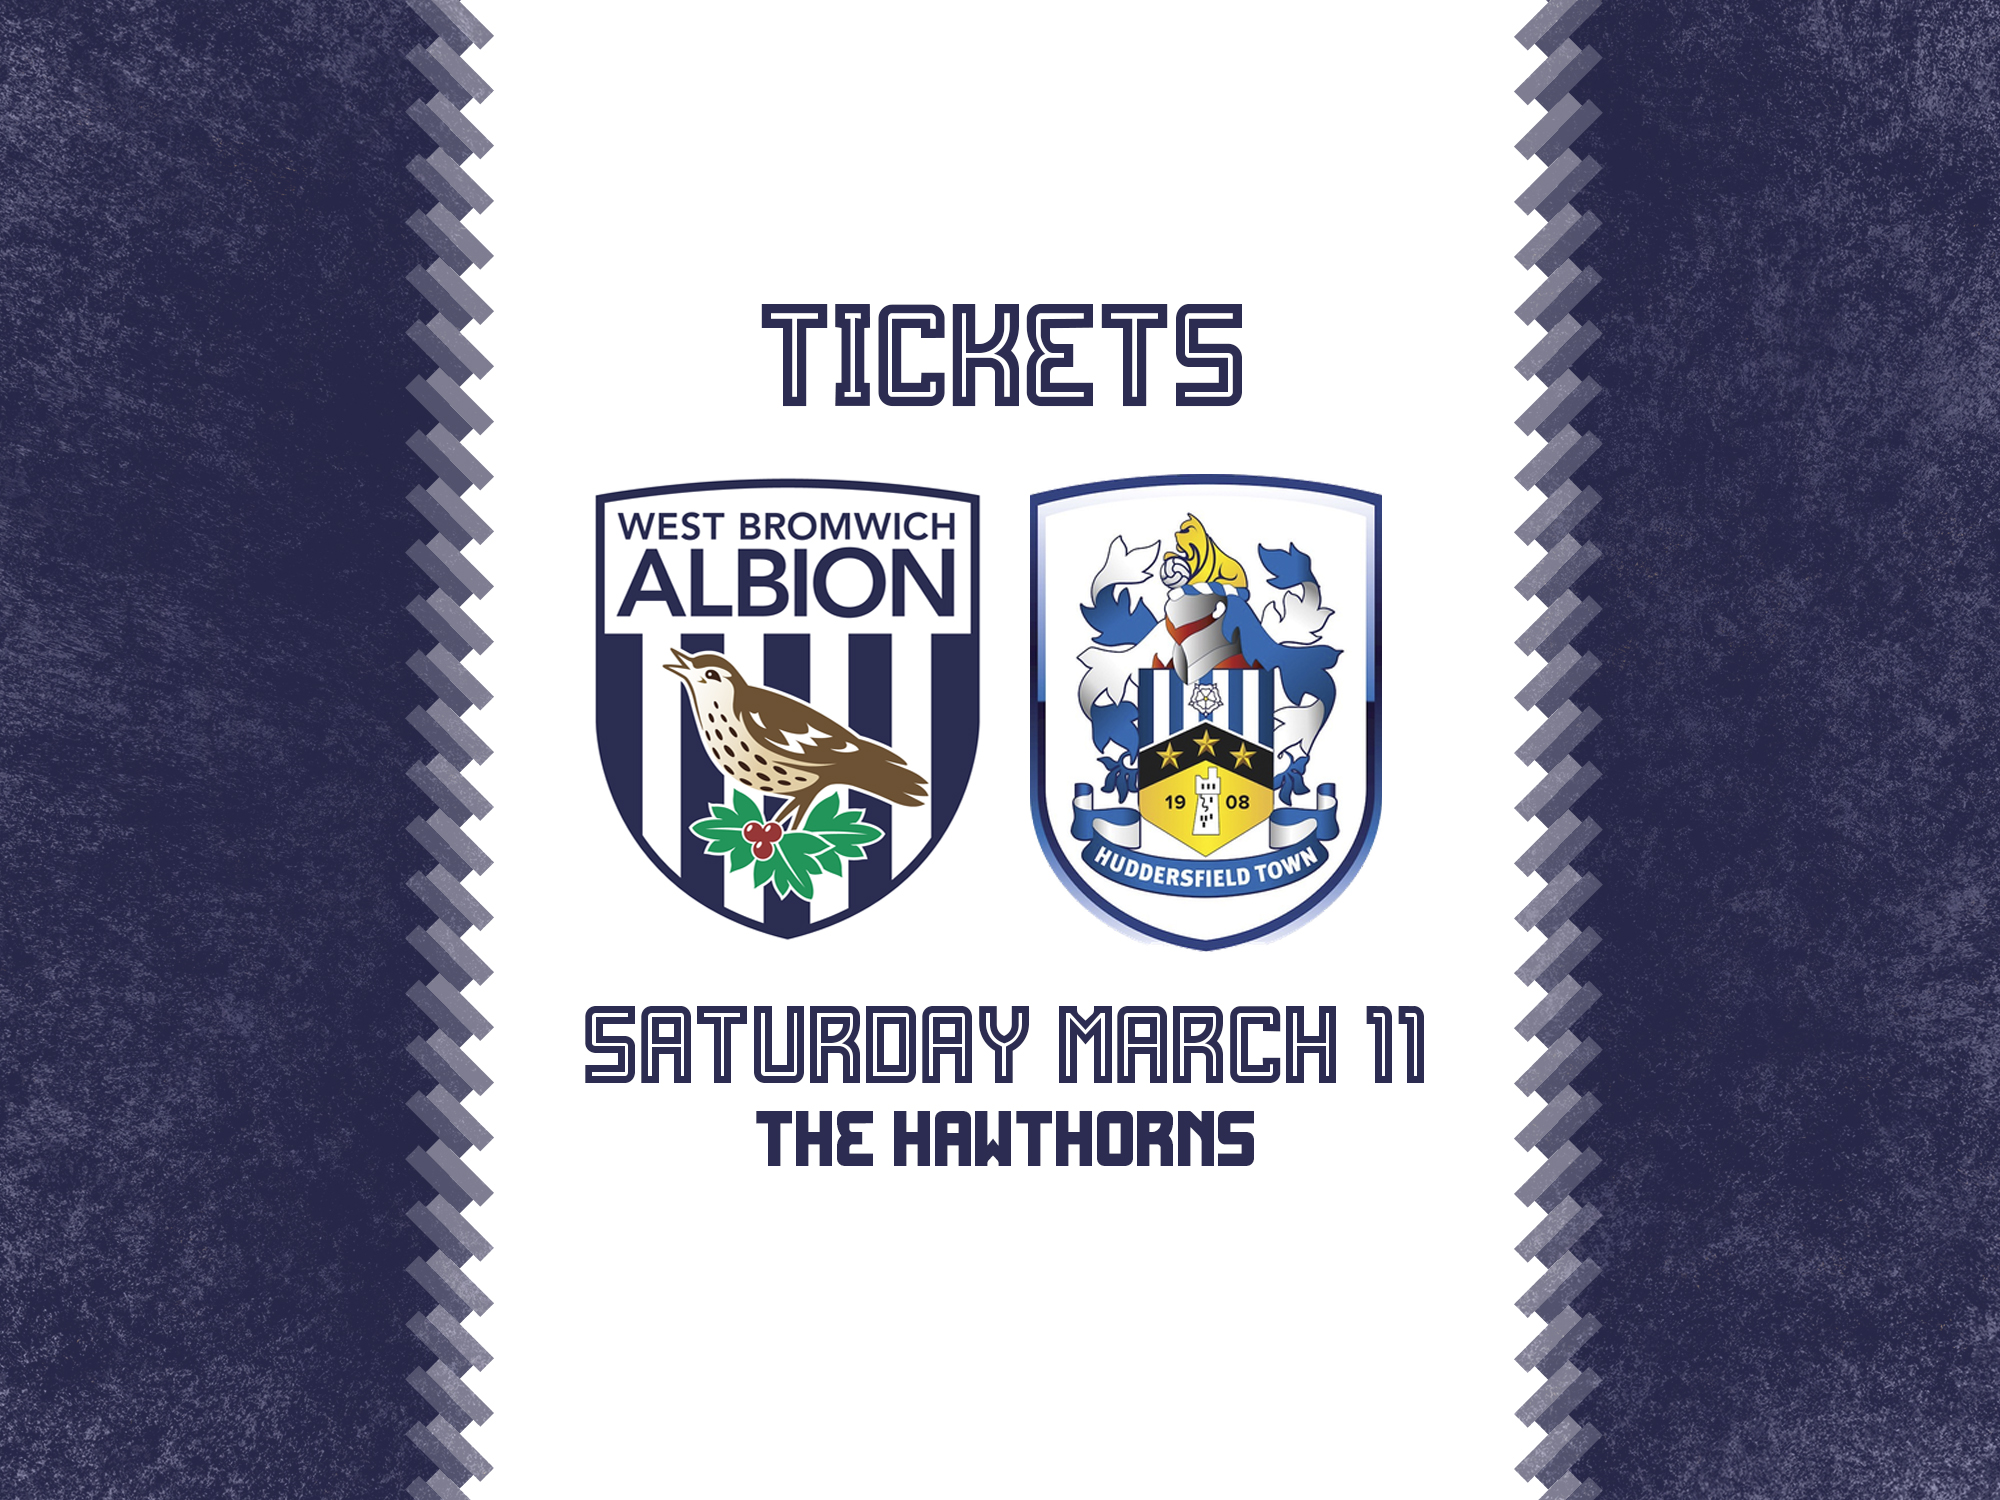 A ticket graphic for Albion's match against Huddersfield